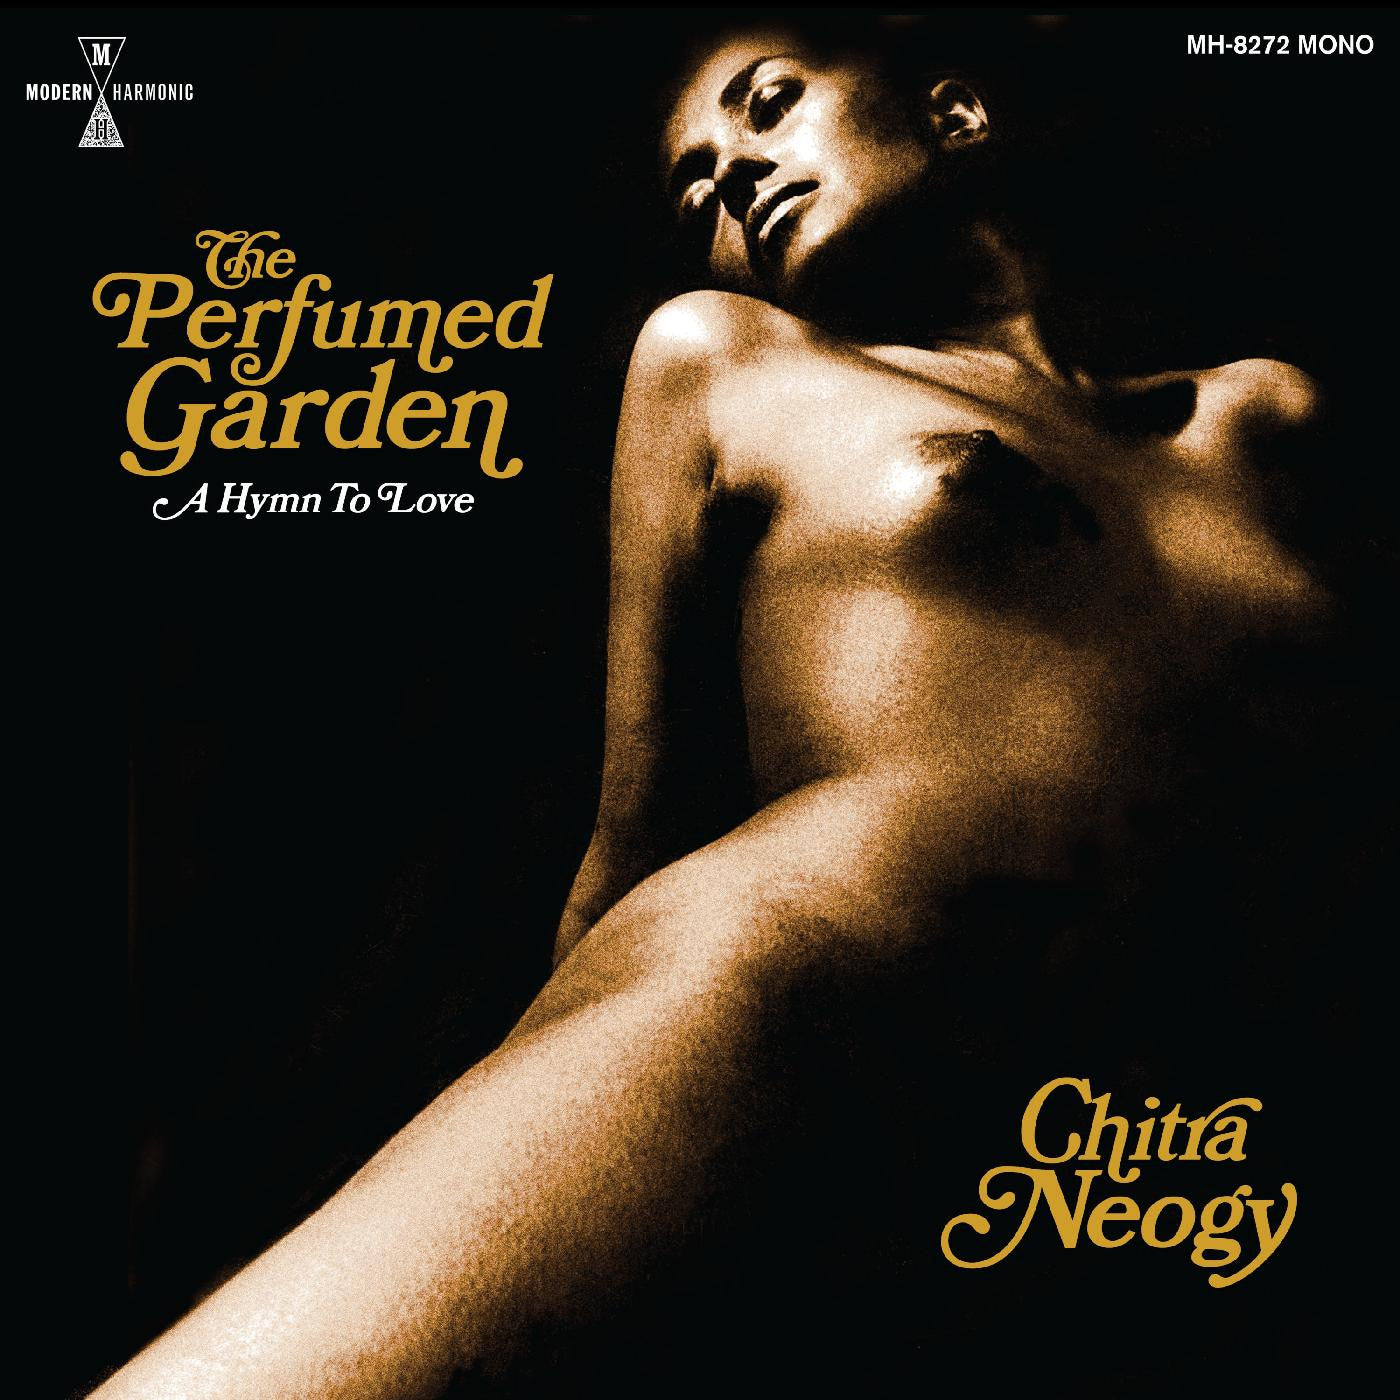 Chitra Neogy - The Perfumed Garden LP + Book Box